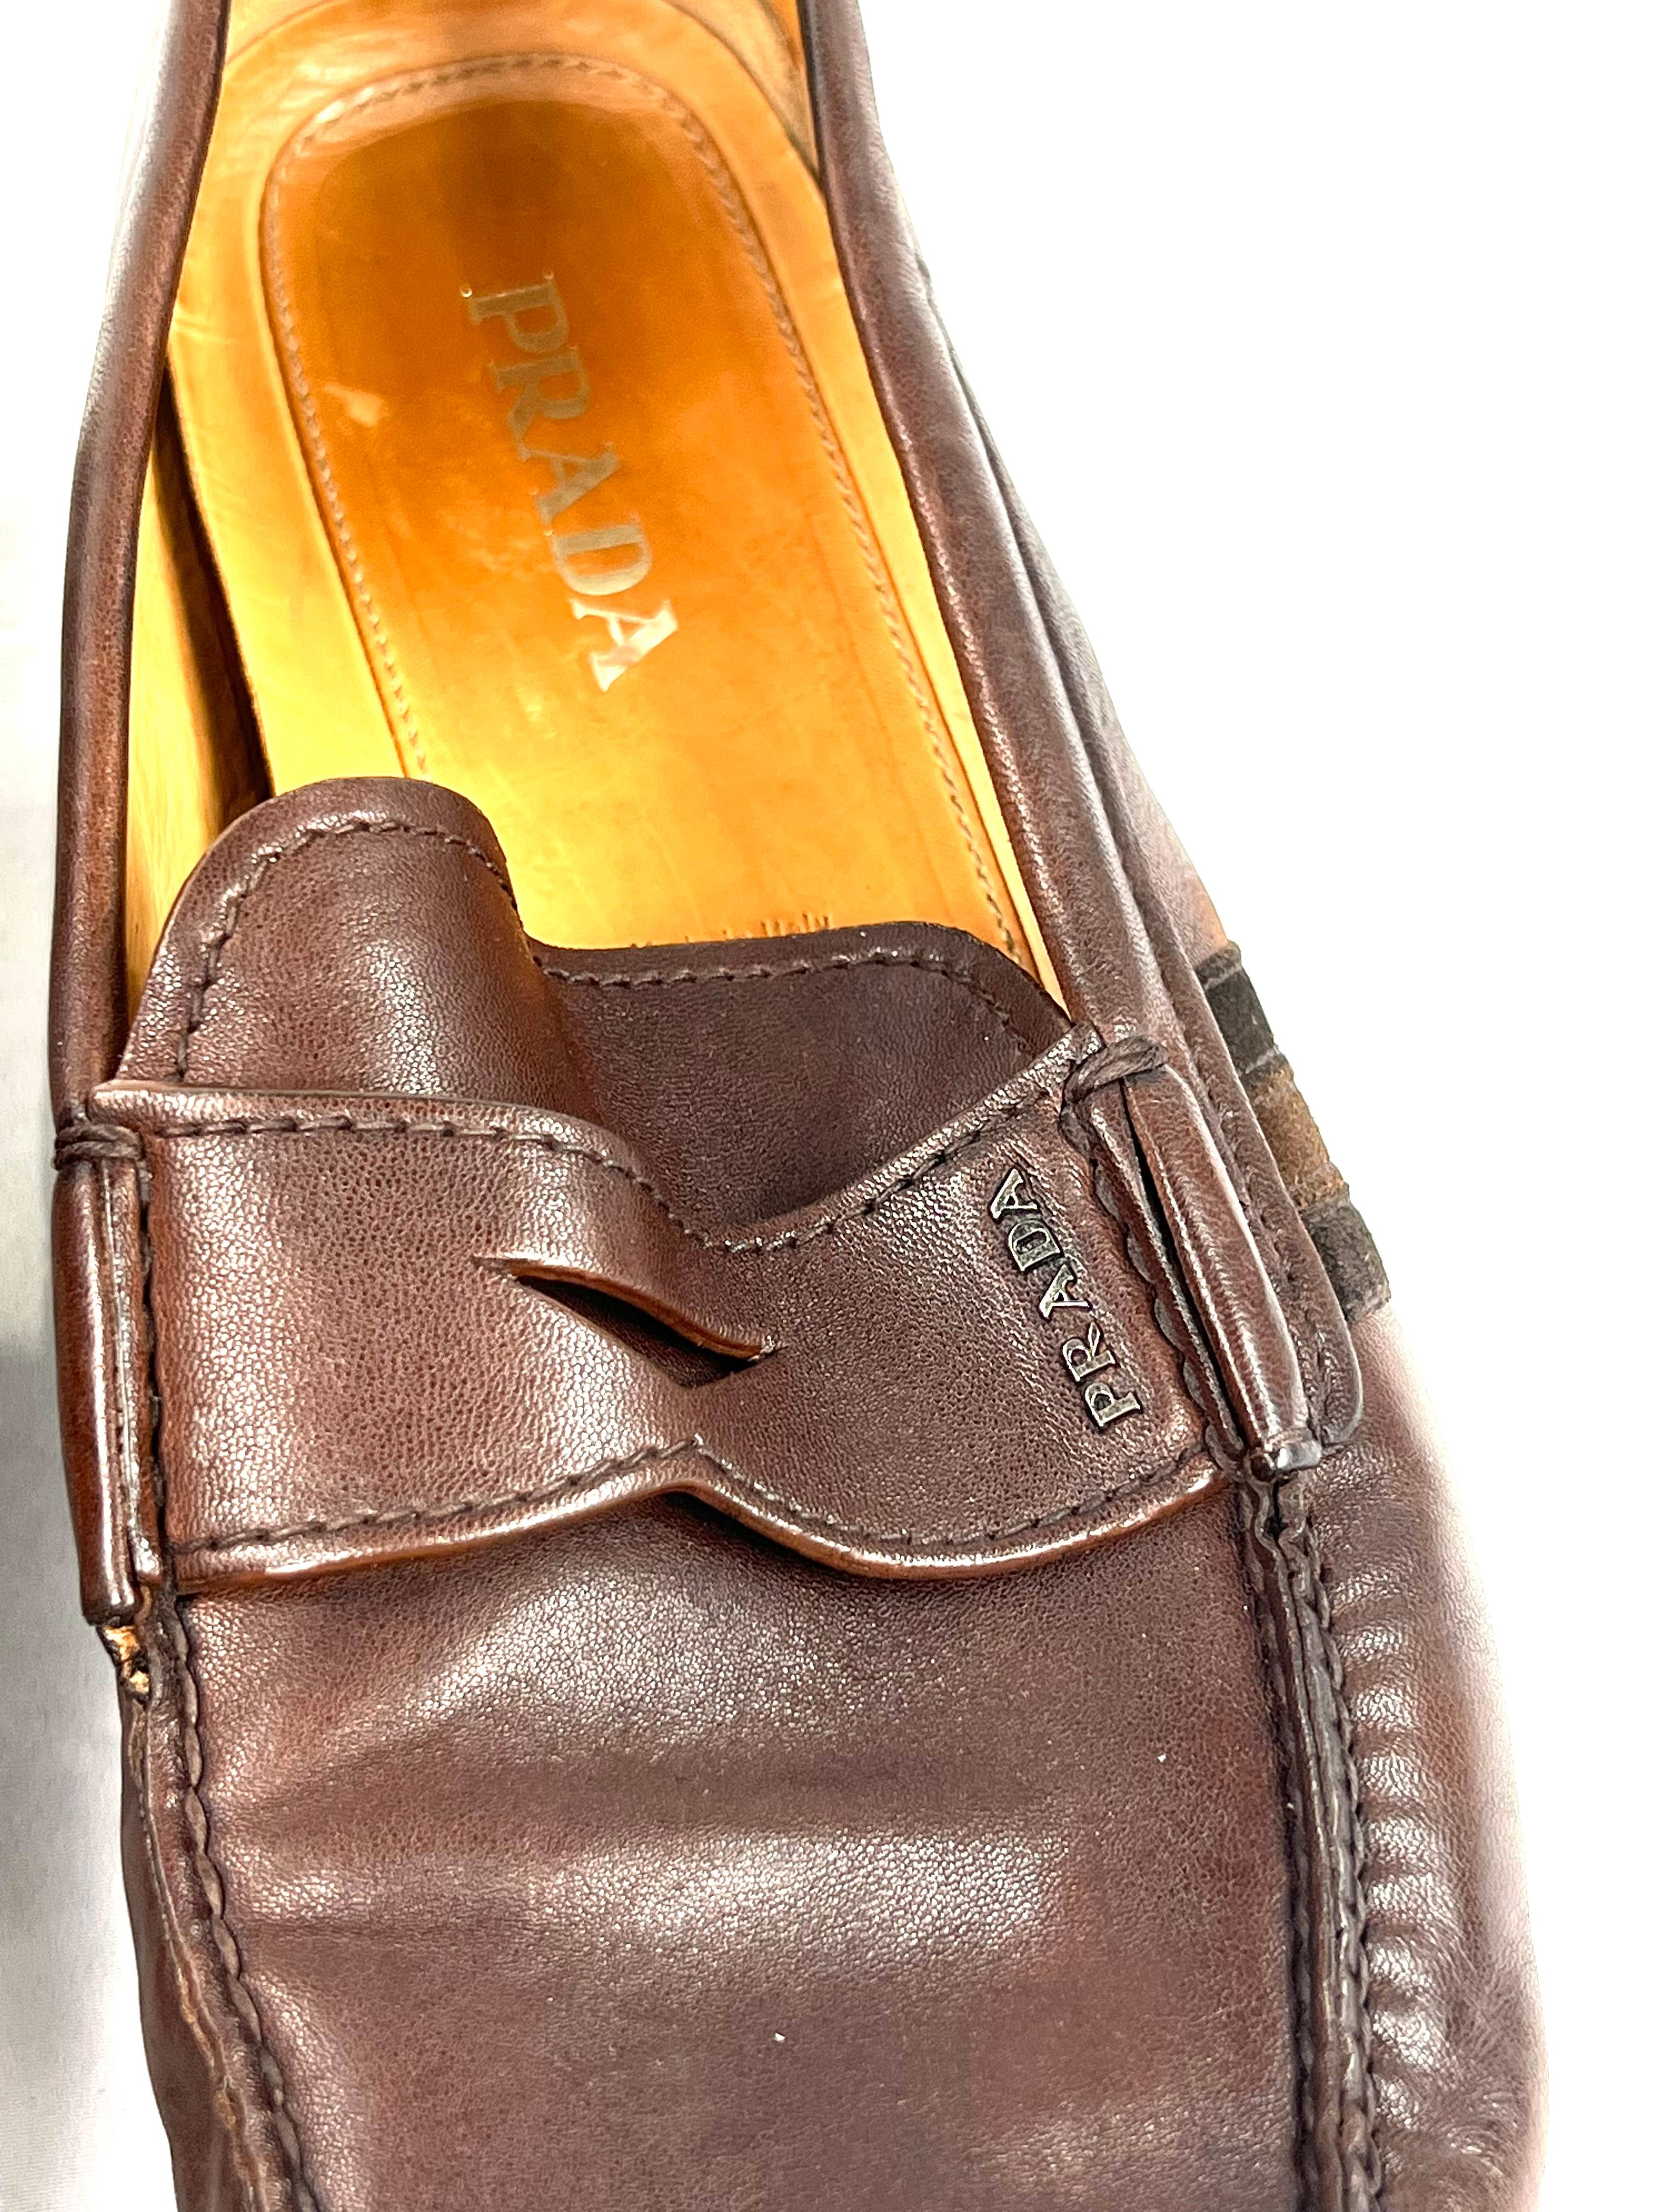 Product details:

The shoes are made out of brown leather. It features brown and black striped design and rubber soles.